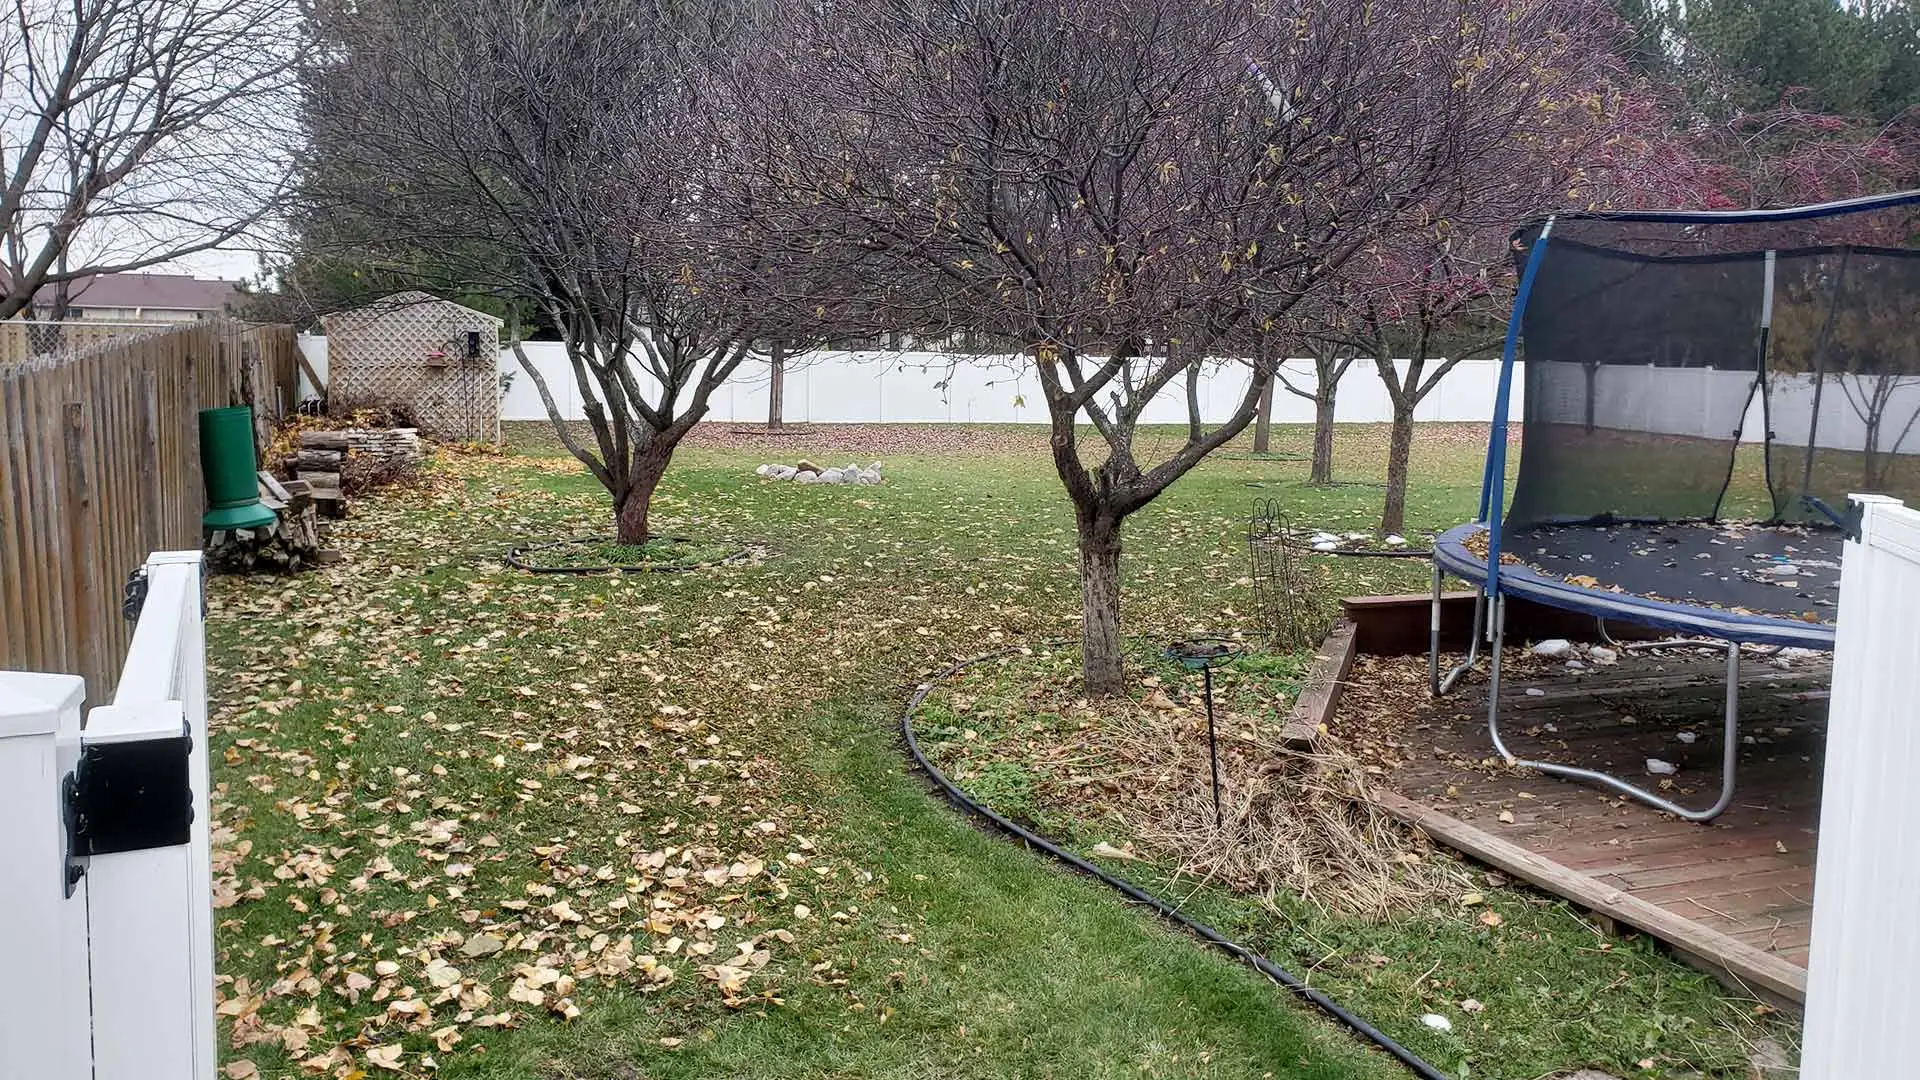 All the leaves have fallen from the trees of this backyard in Saginaw, %state%%.